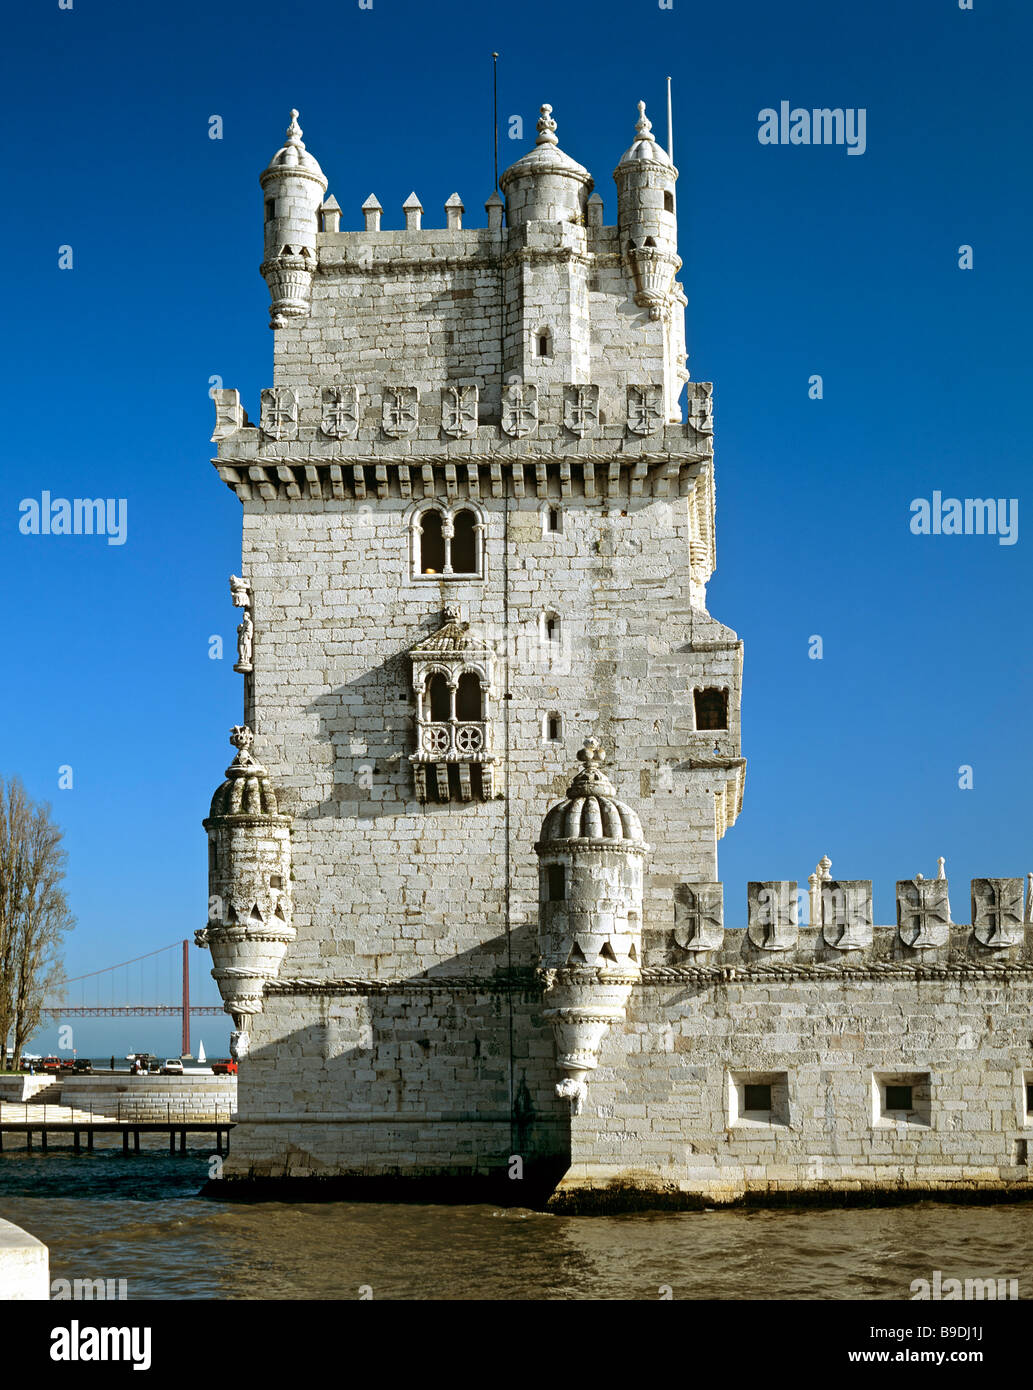 Torre de Belem, built 1515, lighthouse built in the Manueline or Portuguese late Gothic style, mouth of the Tagus River, Lisbon Stock Photo